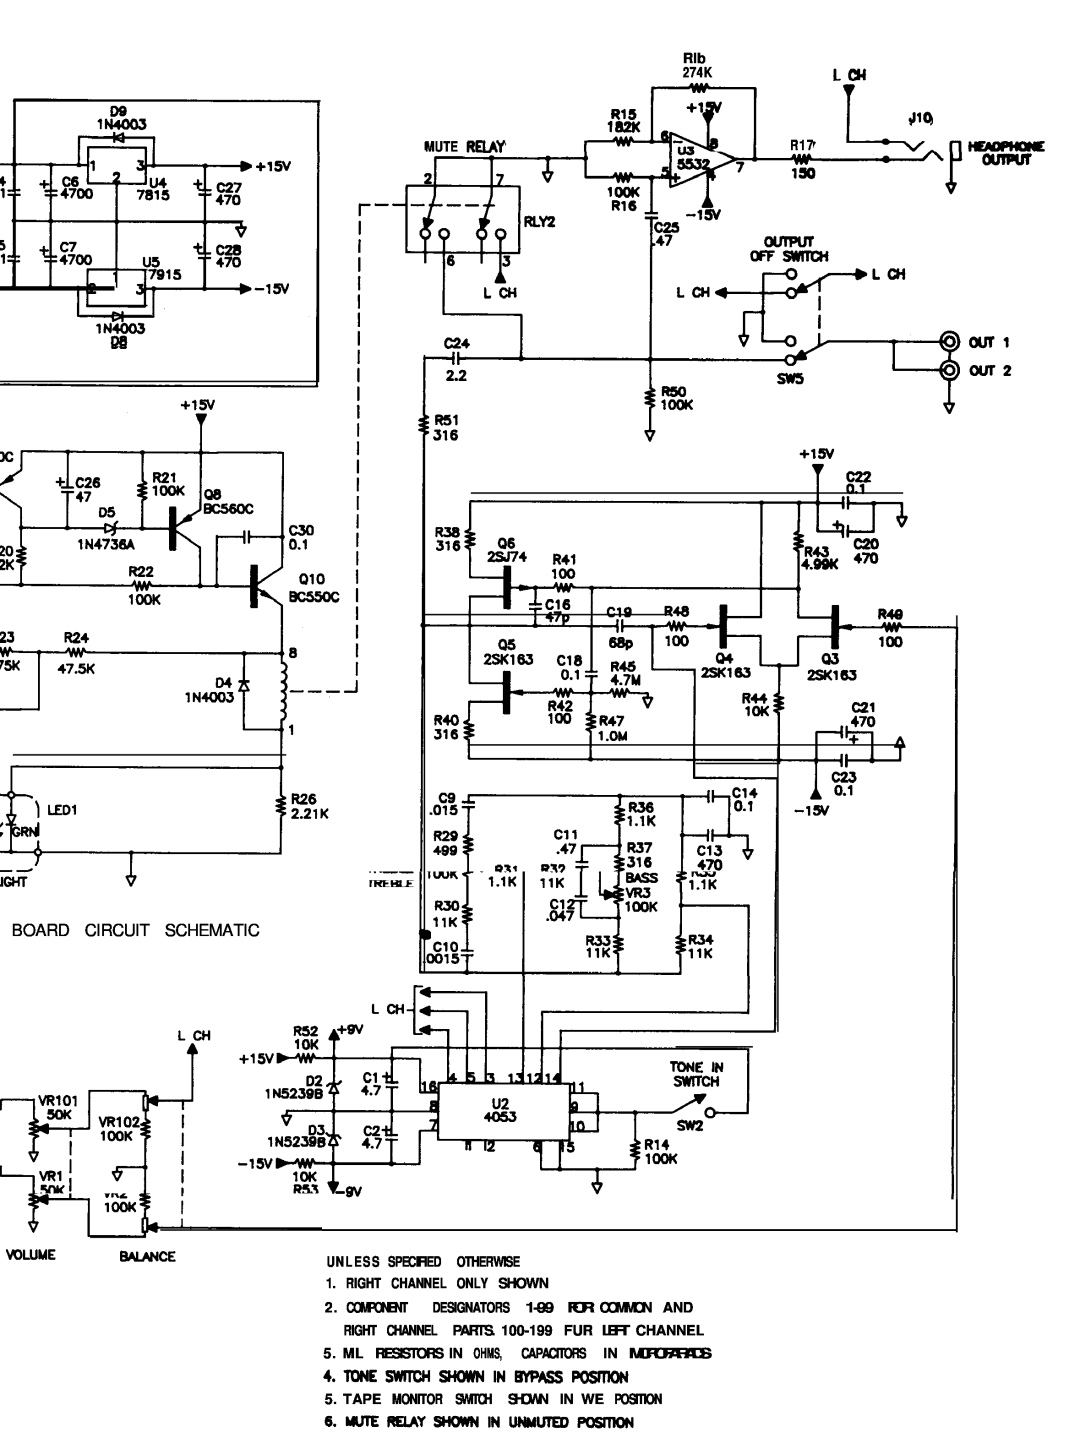 Hafler 0915P manual Board Circuit Schematic, Rlb 274K JlO, Mute Ruay, Enance, Otherwise, Unless Specified, Right Channel 